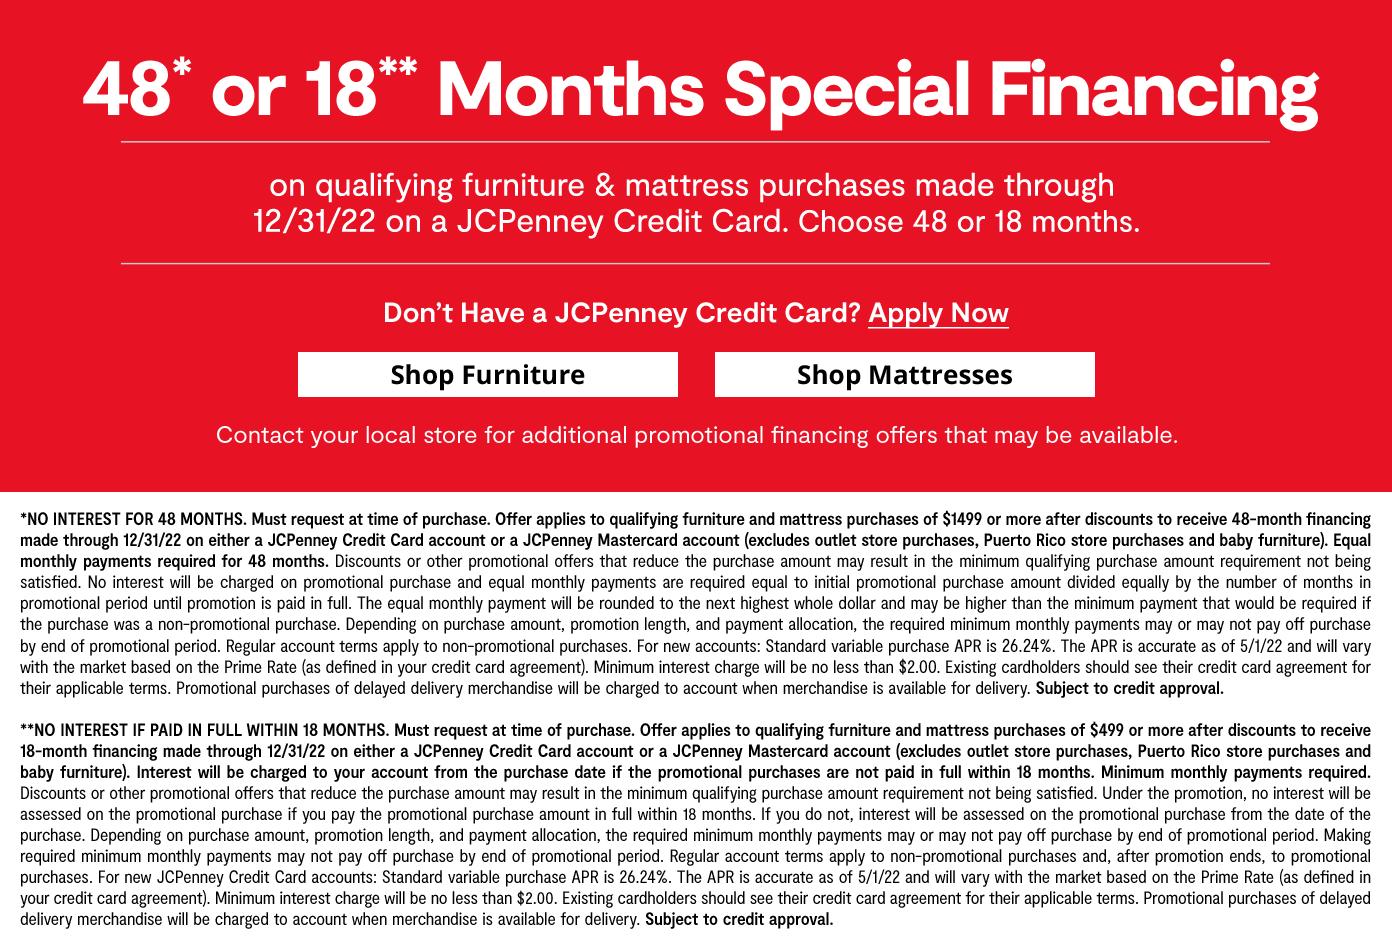 48 OR 18 months special financing on qualifying furniture & mattress purchases by 12/31/22 on a JCP Credit Card Learn More